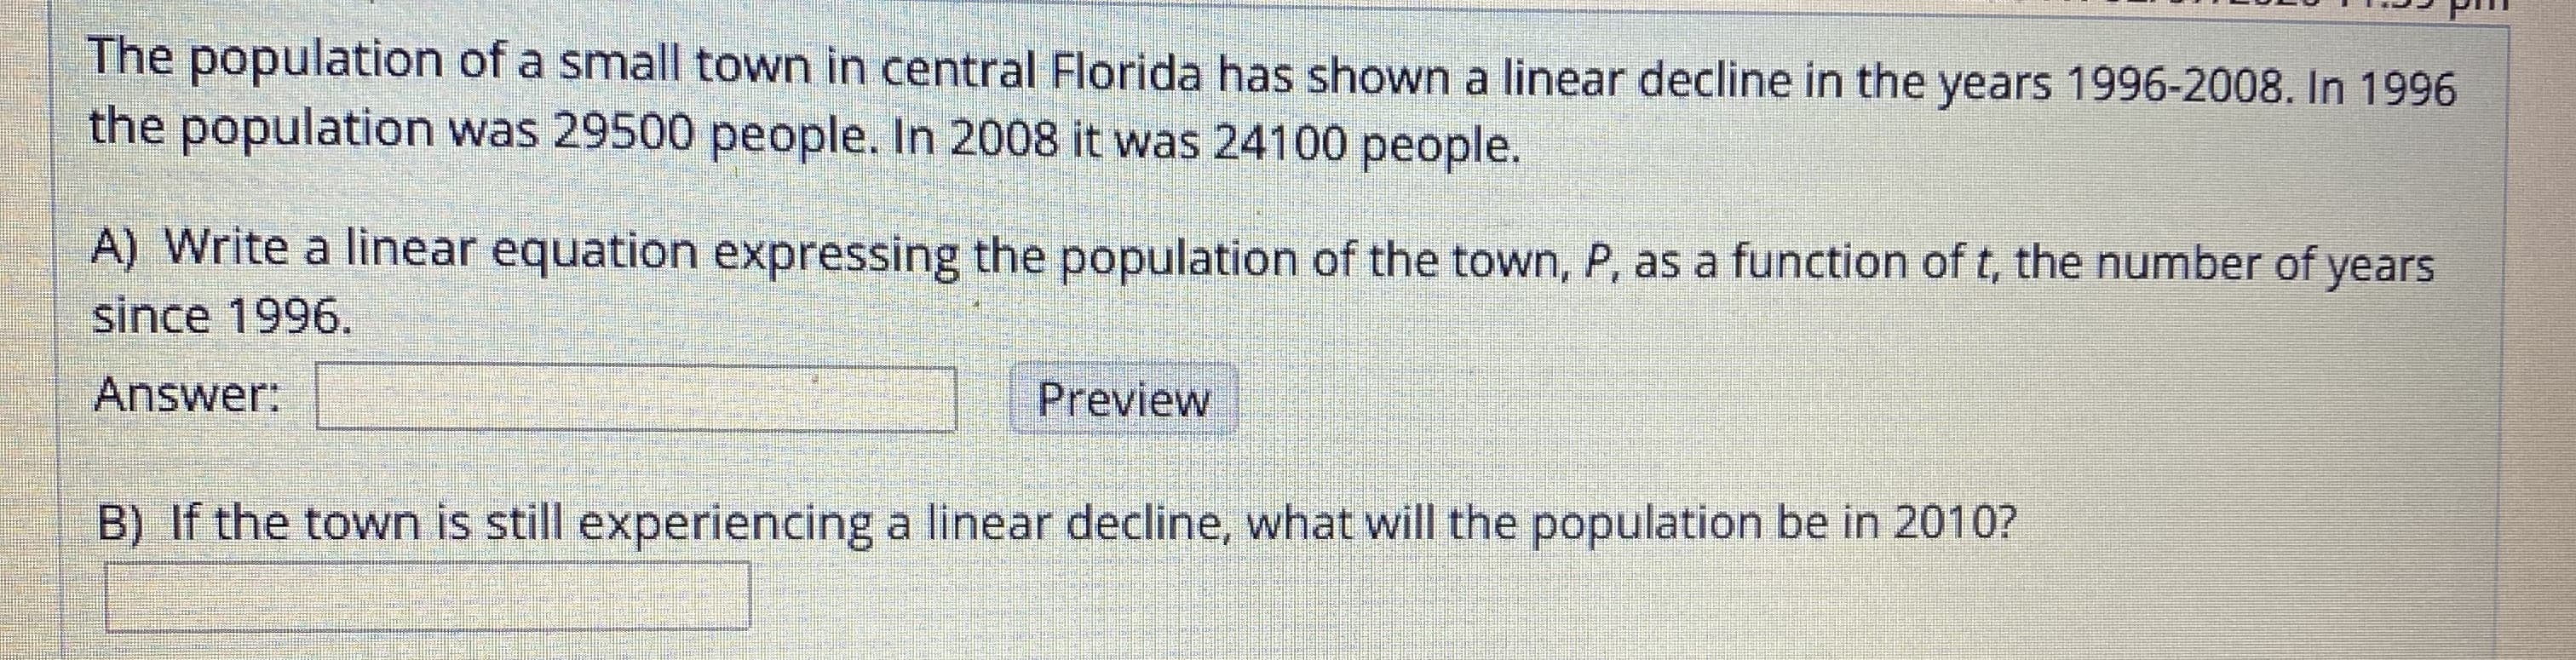 The population of a small town in central Florida has shown a linear decline in the years 1996-2008. In 1996
the population was 29500 people. In 2008 it was 241000 people.
A) Write a linear equation expressing the population of the town, P, as a function of t, the number of years
since 1996.
Answer:
Preview
B) If the town is still experiencing a linear decline, what will the
population be in 2010?
